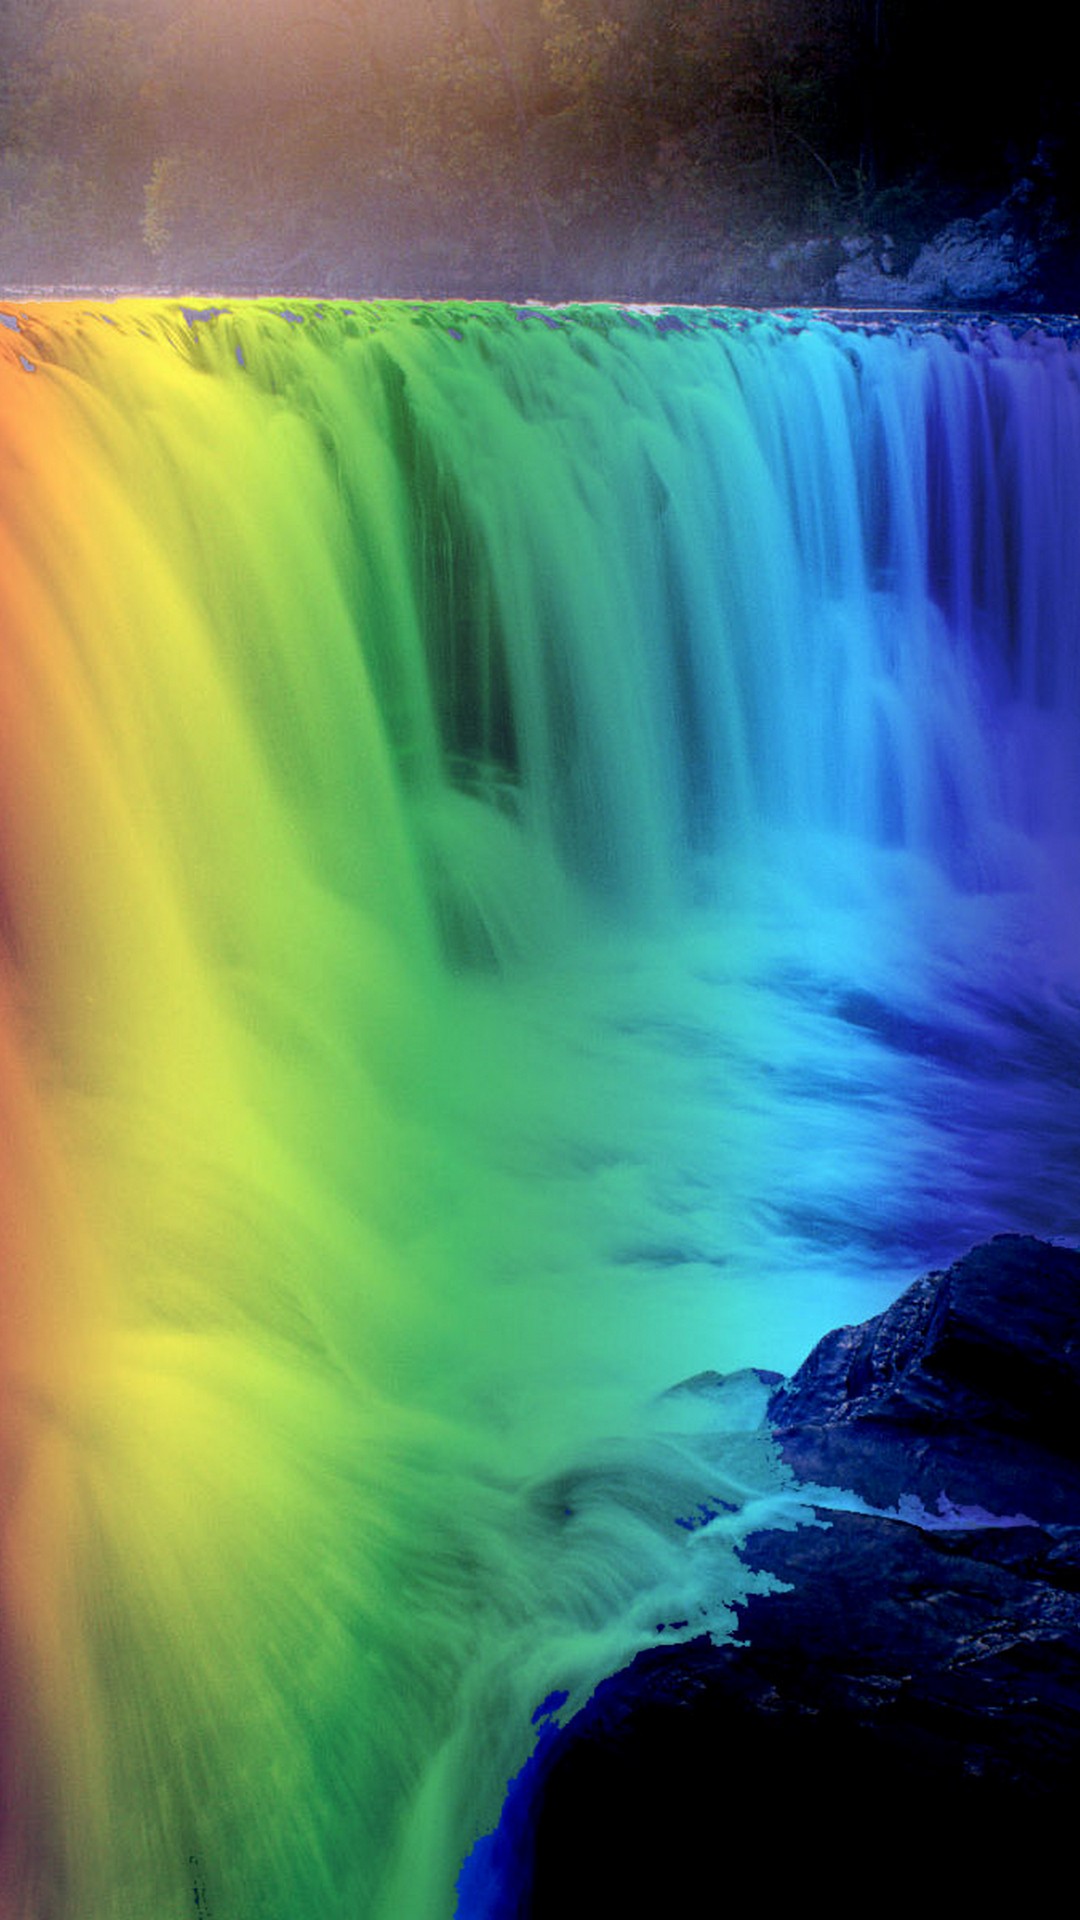 Rainbow Android Wallpaper with resolution 1080X1920 pixel. You can make this wallpaper for your Android backgrounds, Tablet, Smartphones Screensavers and Mobile Phone Lock Screen